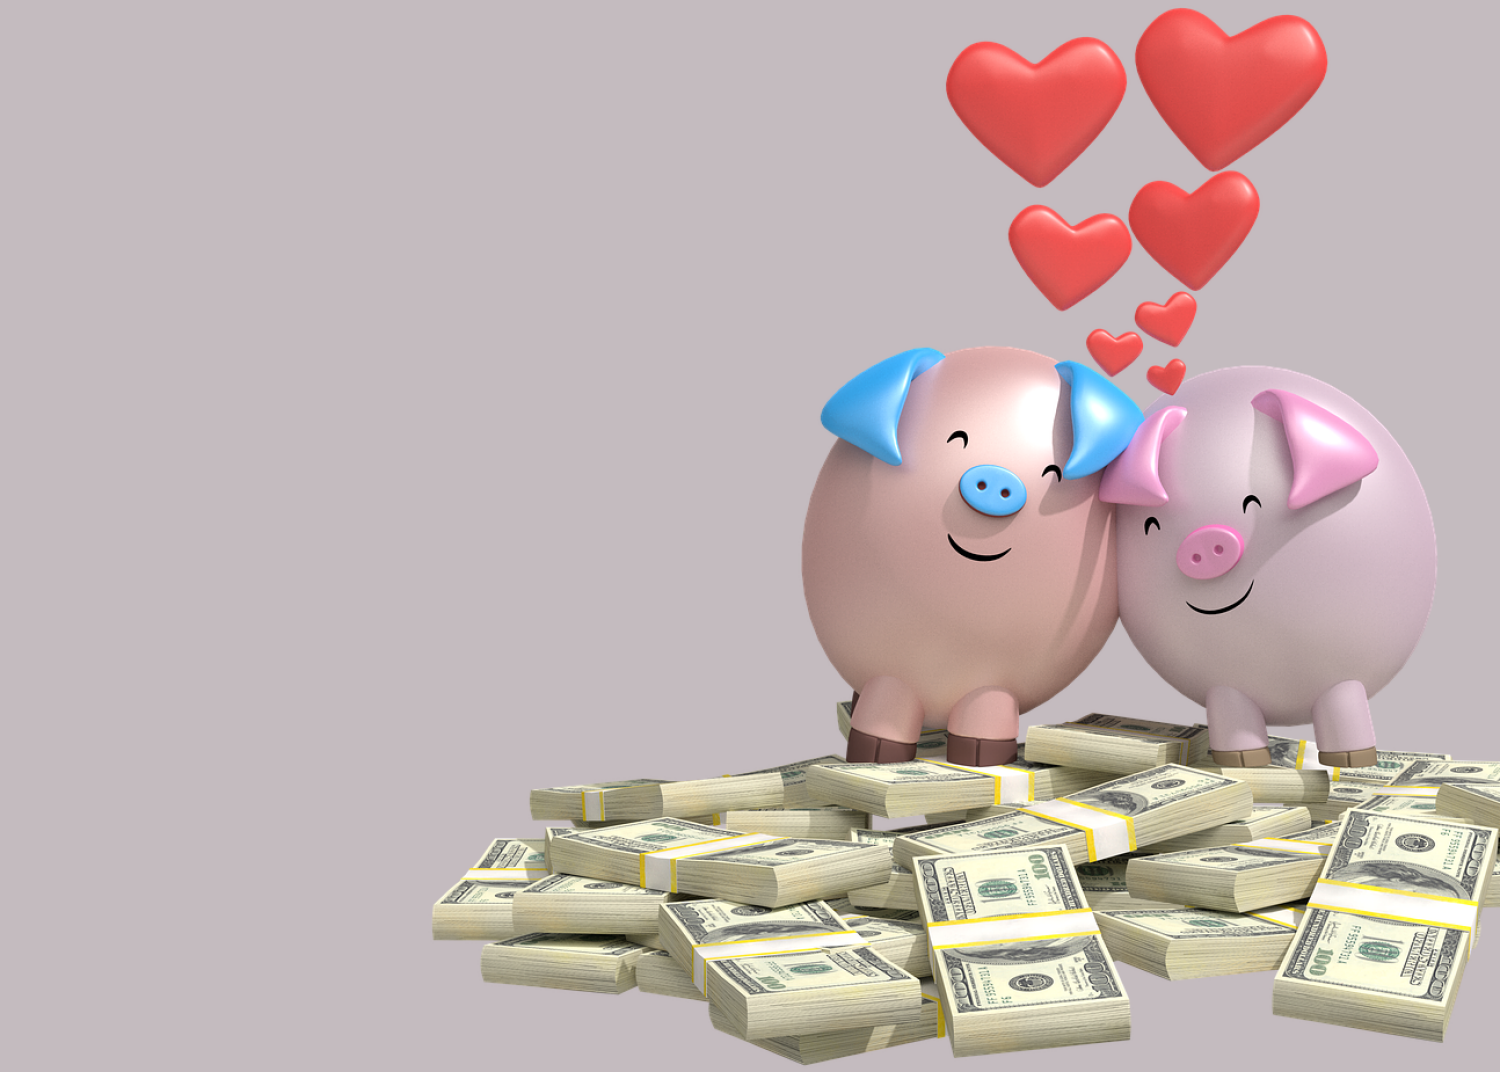 piggy banks with hearts